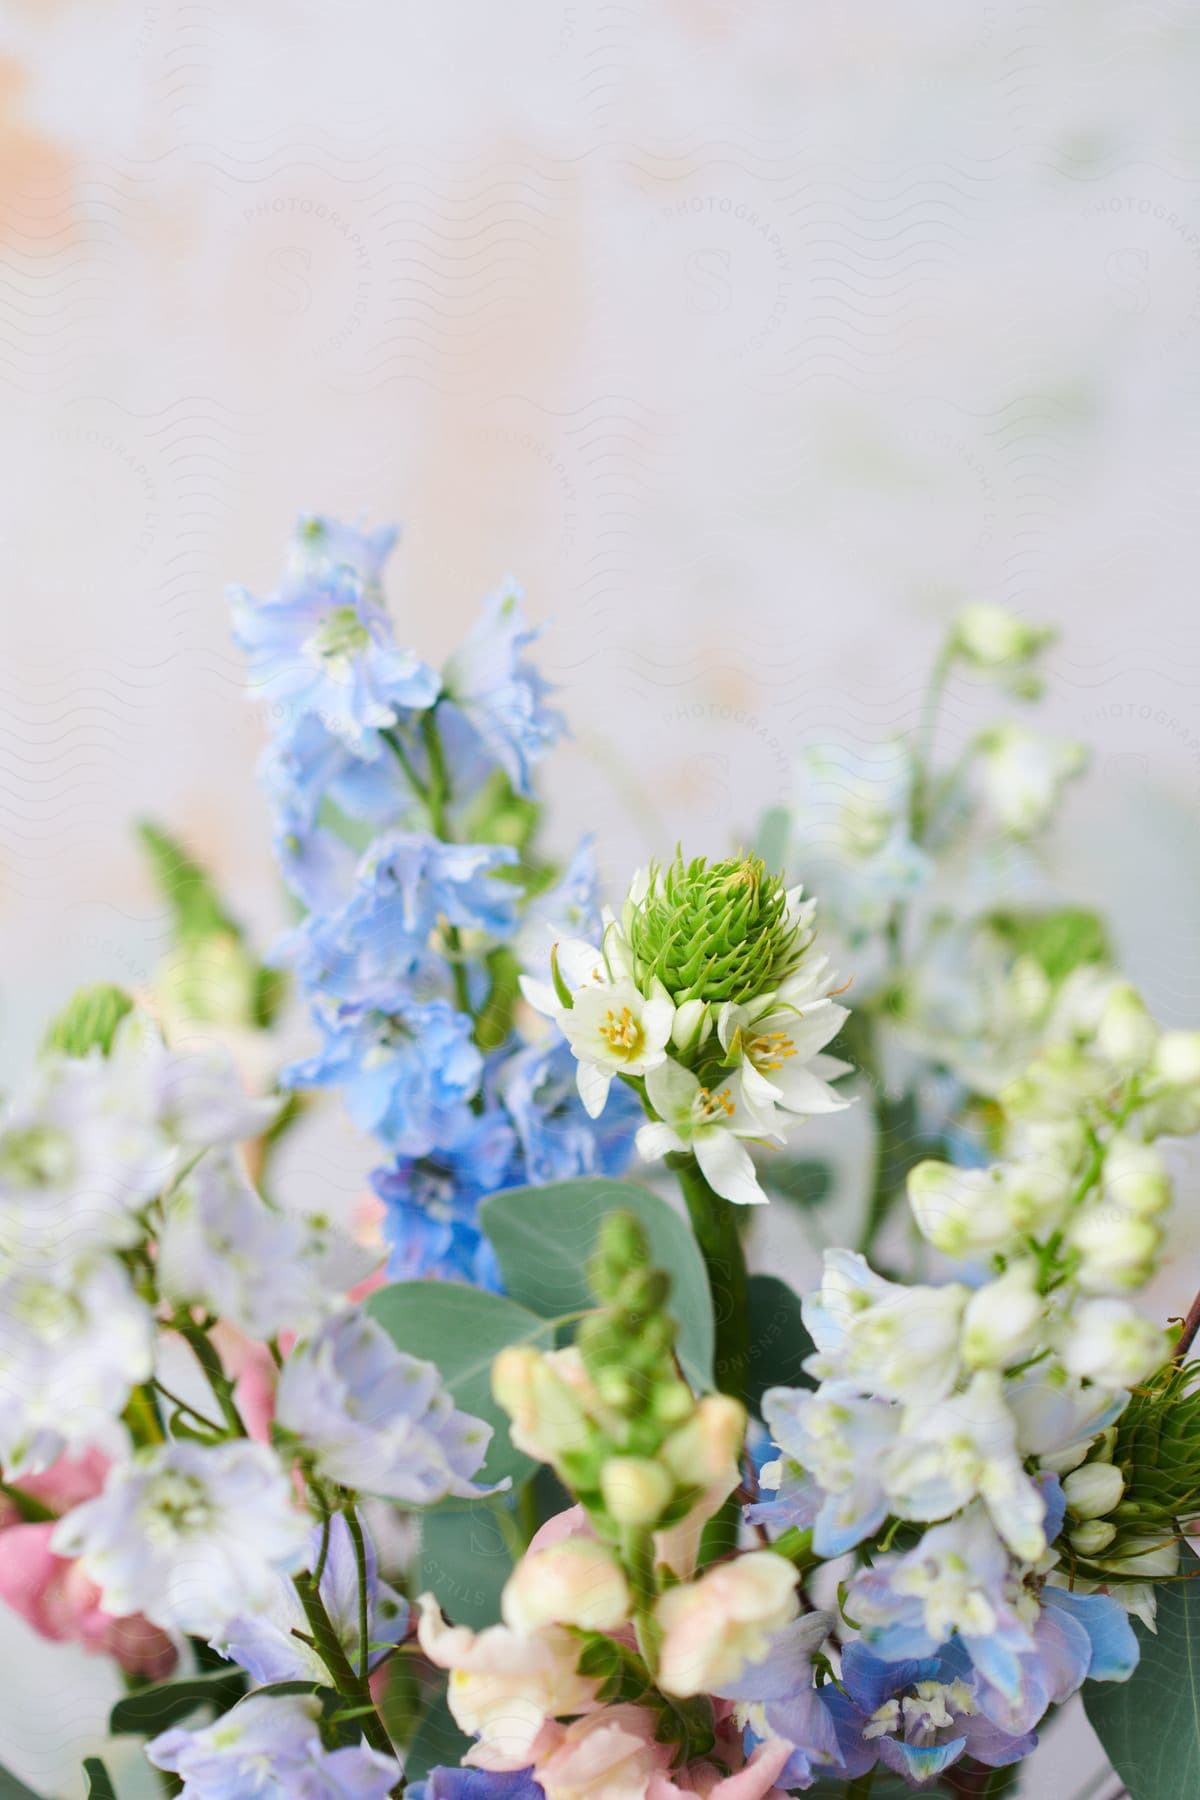 Close-up on a bouquet of flowers of different species against a white blurred background